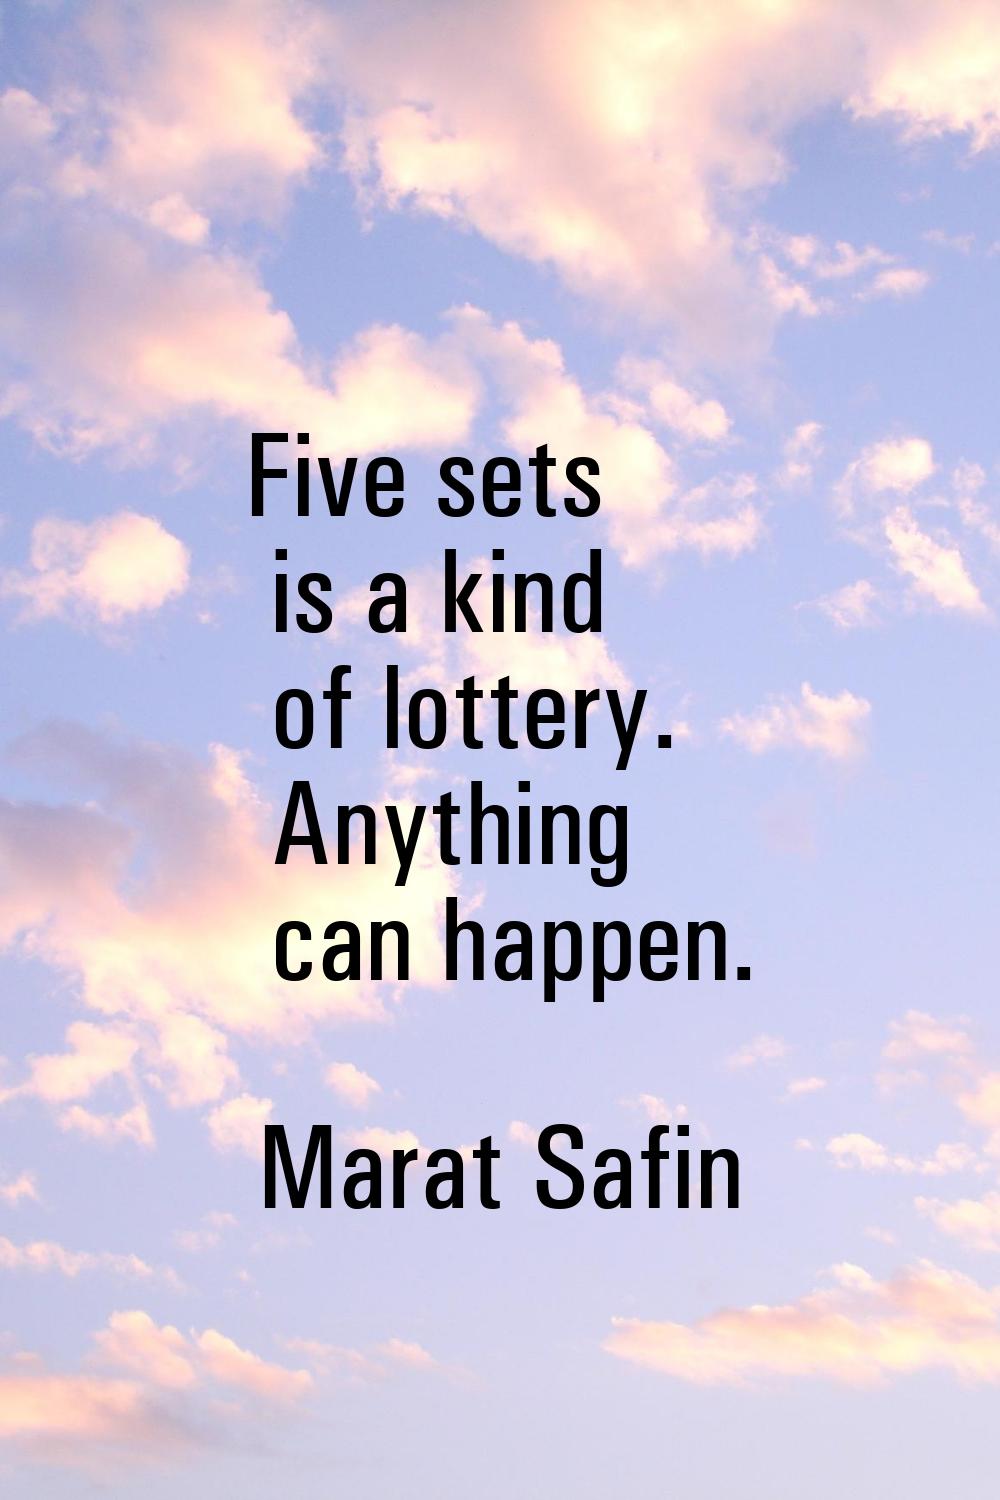 Five sets is a kind of lottery. Anything can happen.